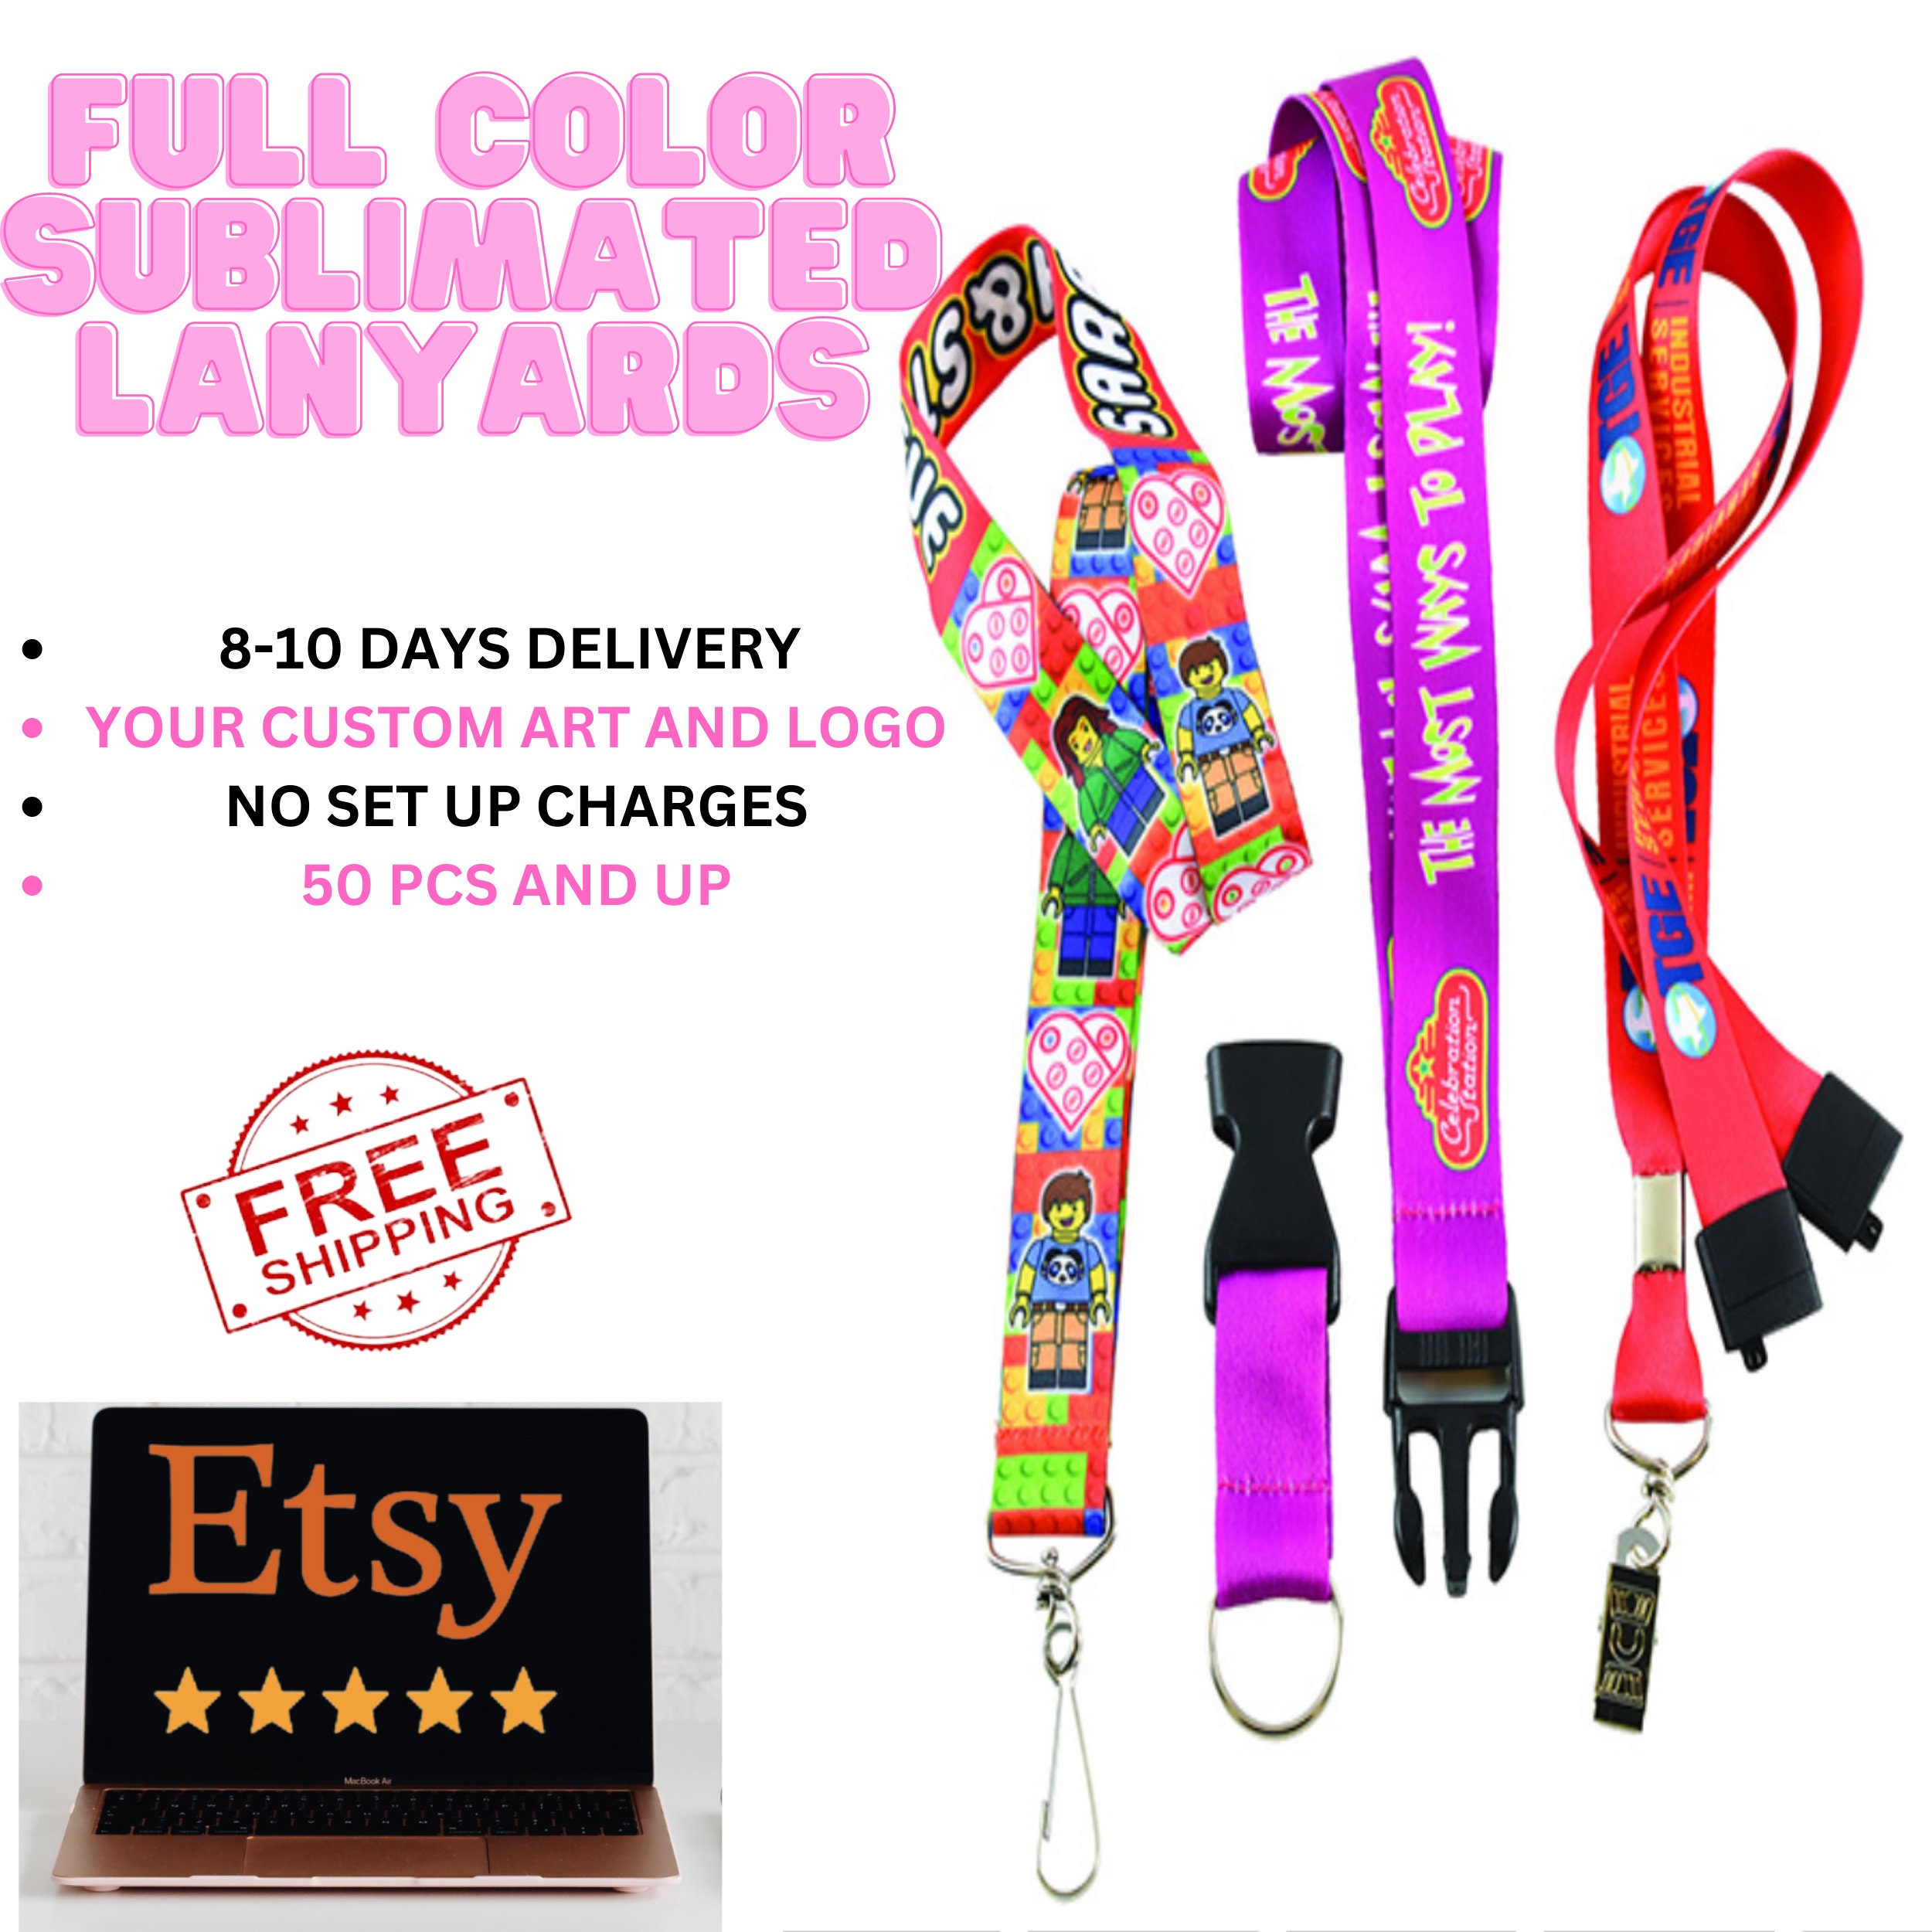 Full color imprint smooth dye-sublimation lanyard - 3/4